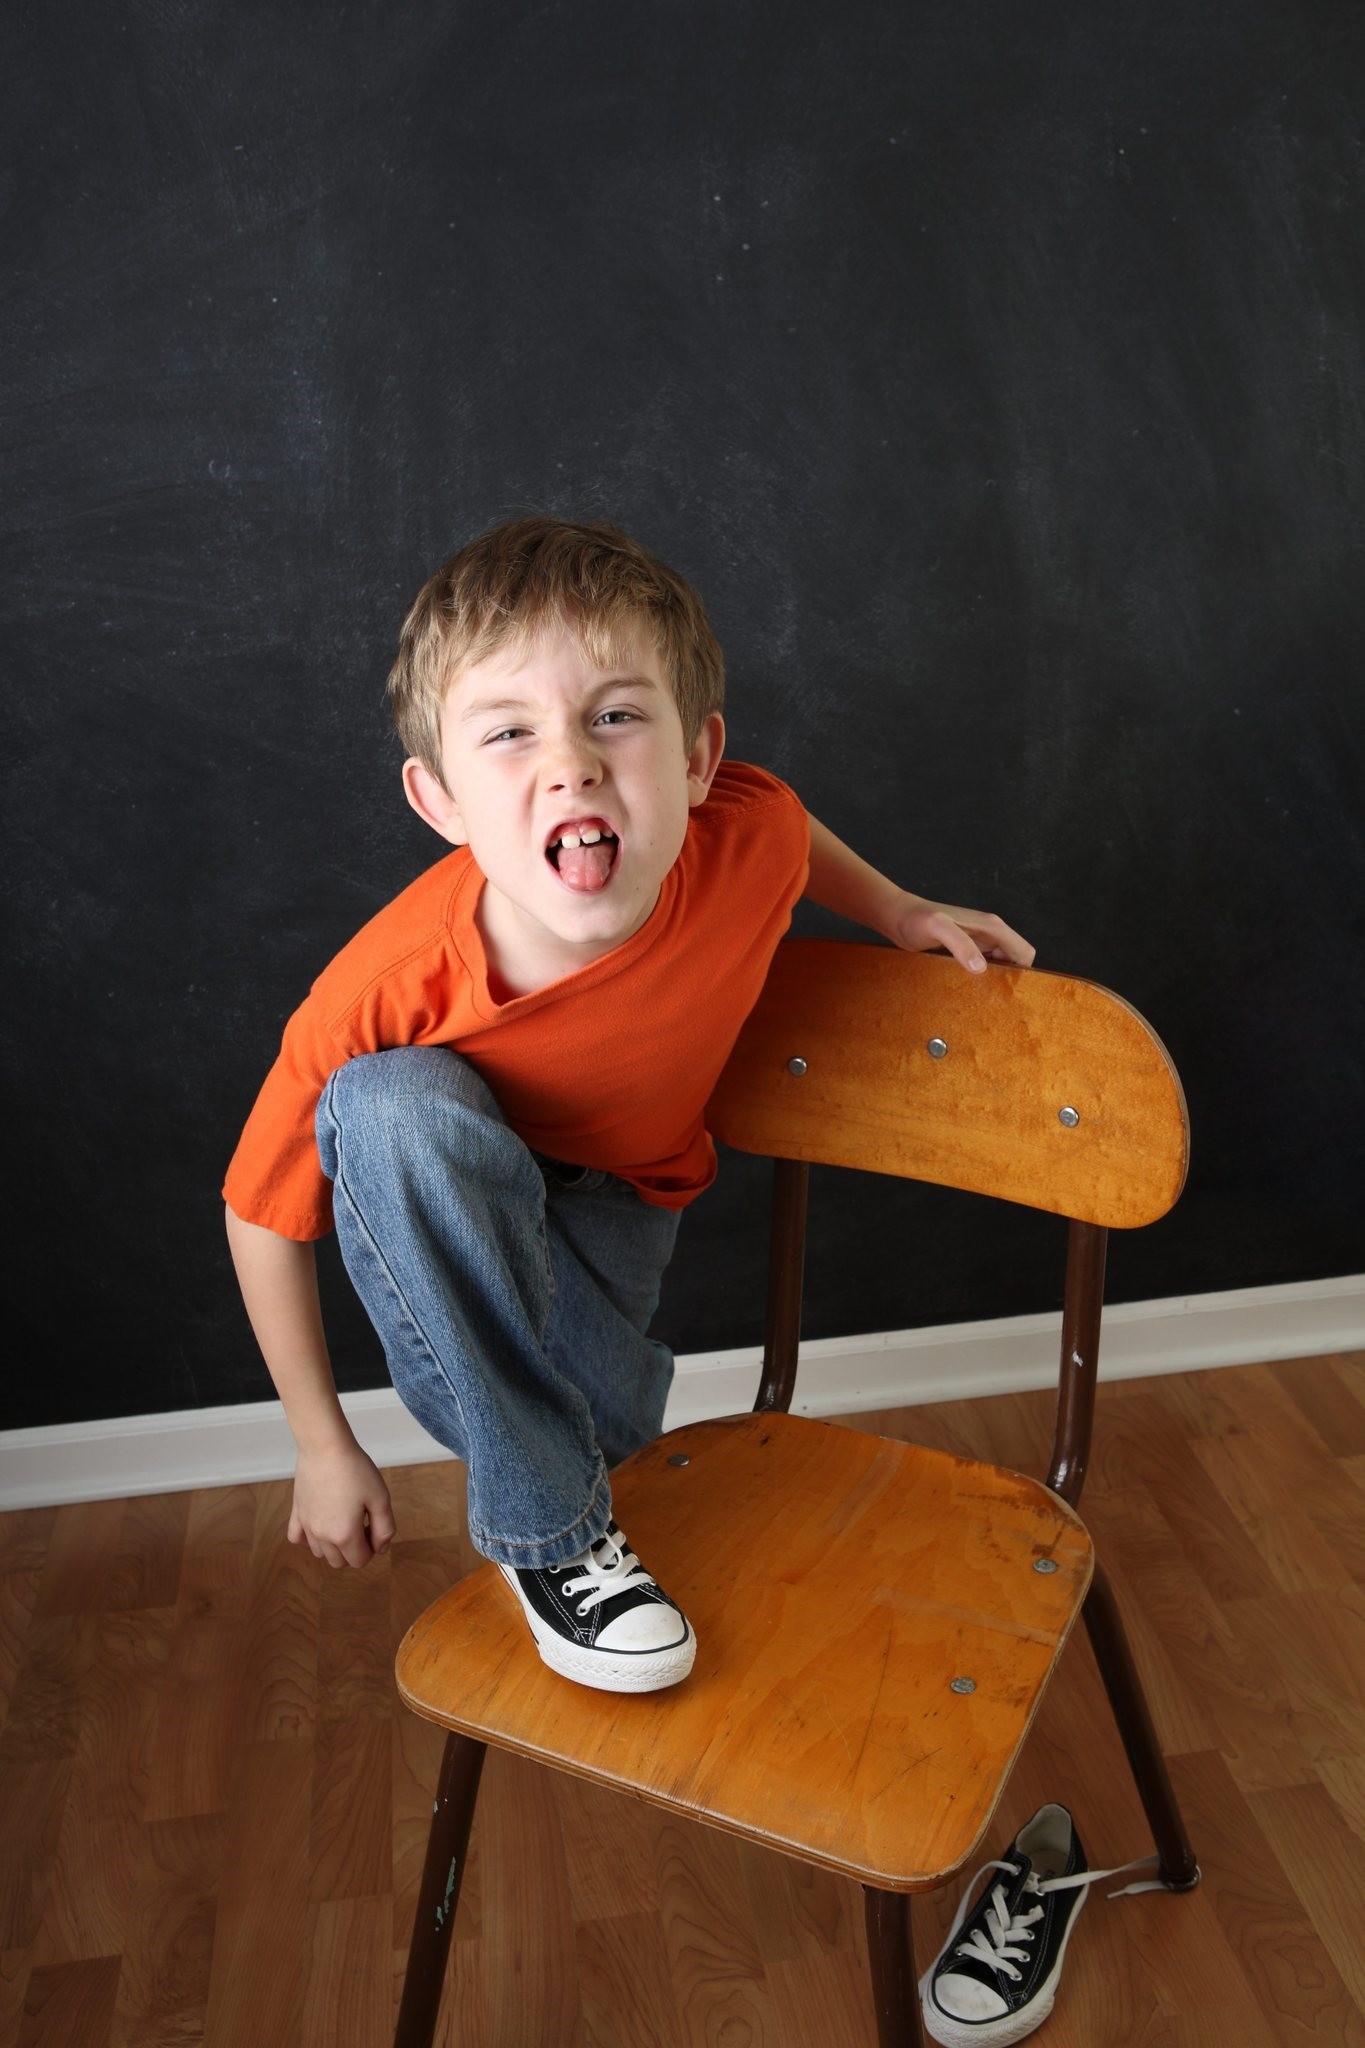 ADHD is generally confused with hyperactivity disorder in children.